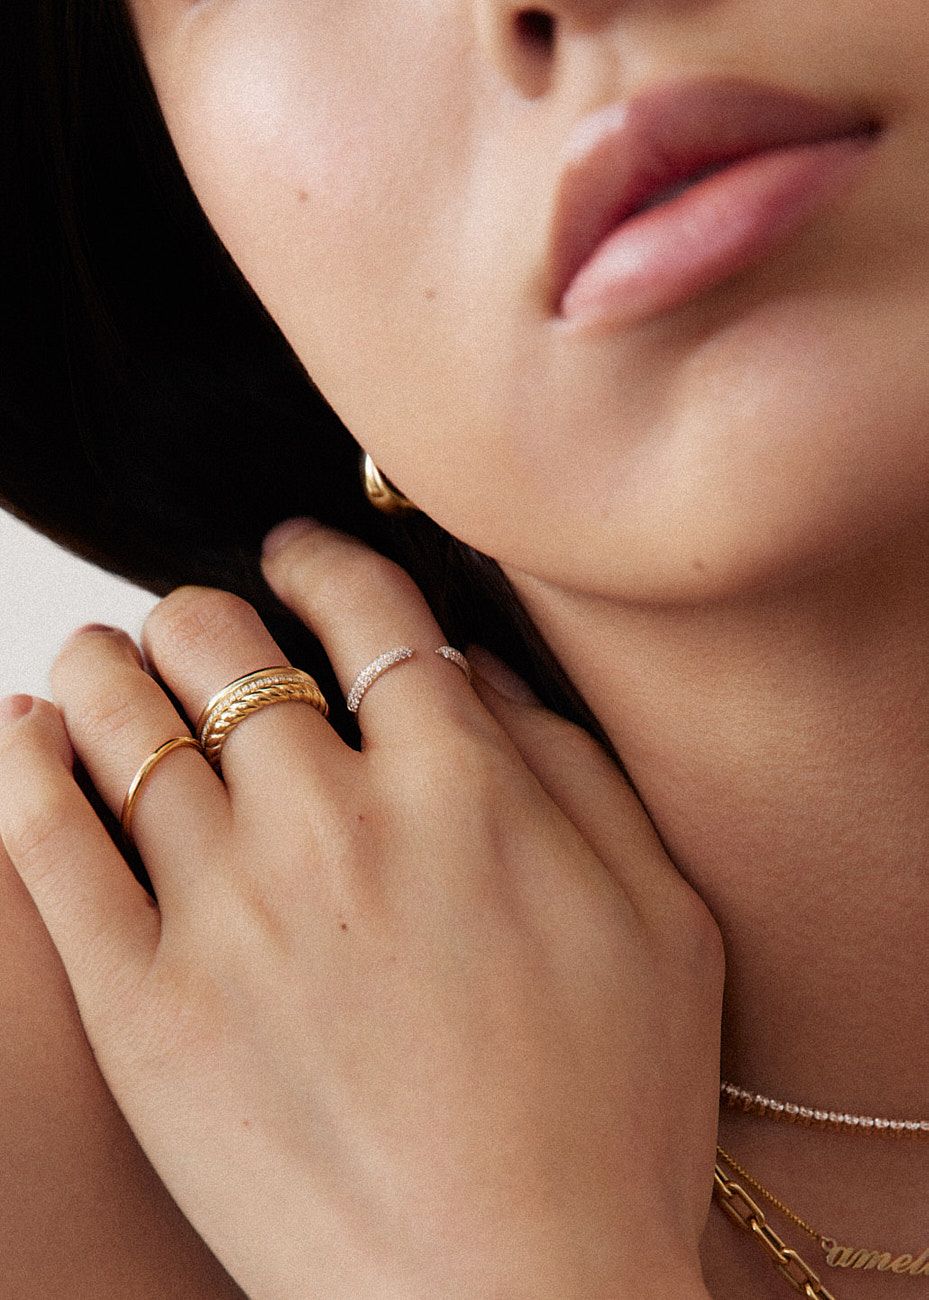 Our Shopping Editors' Favorite Jewelry Brands for Layering